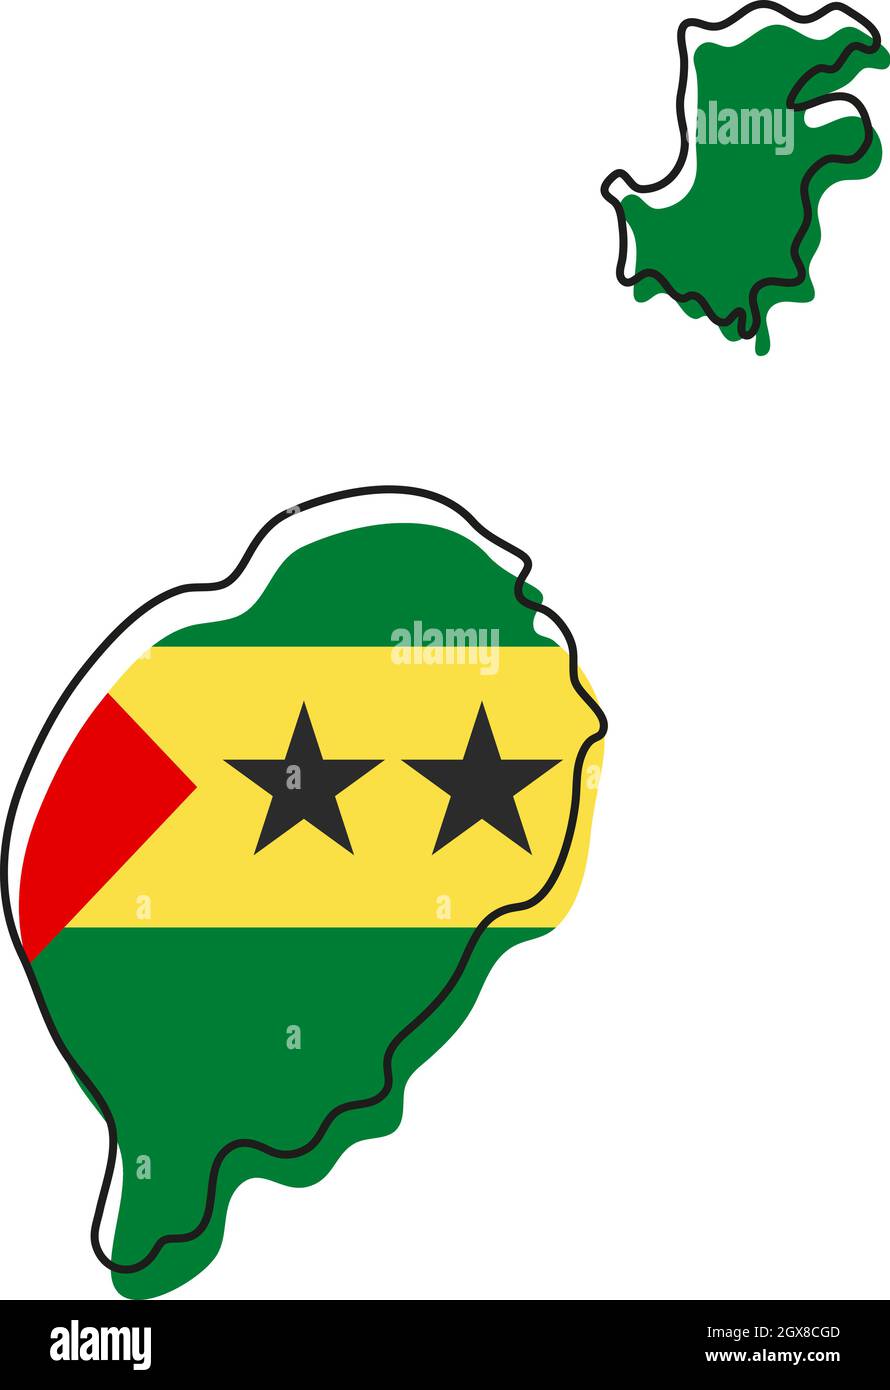 Stylized outline map of Sao Tome and Principe with national flag icon ...